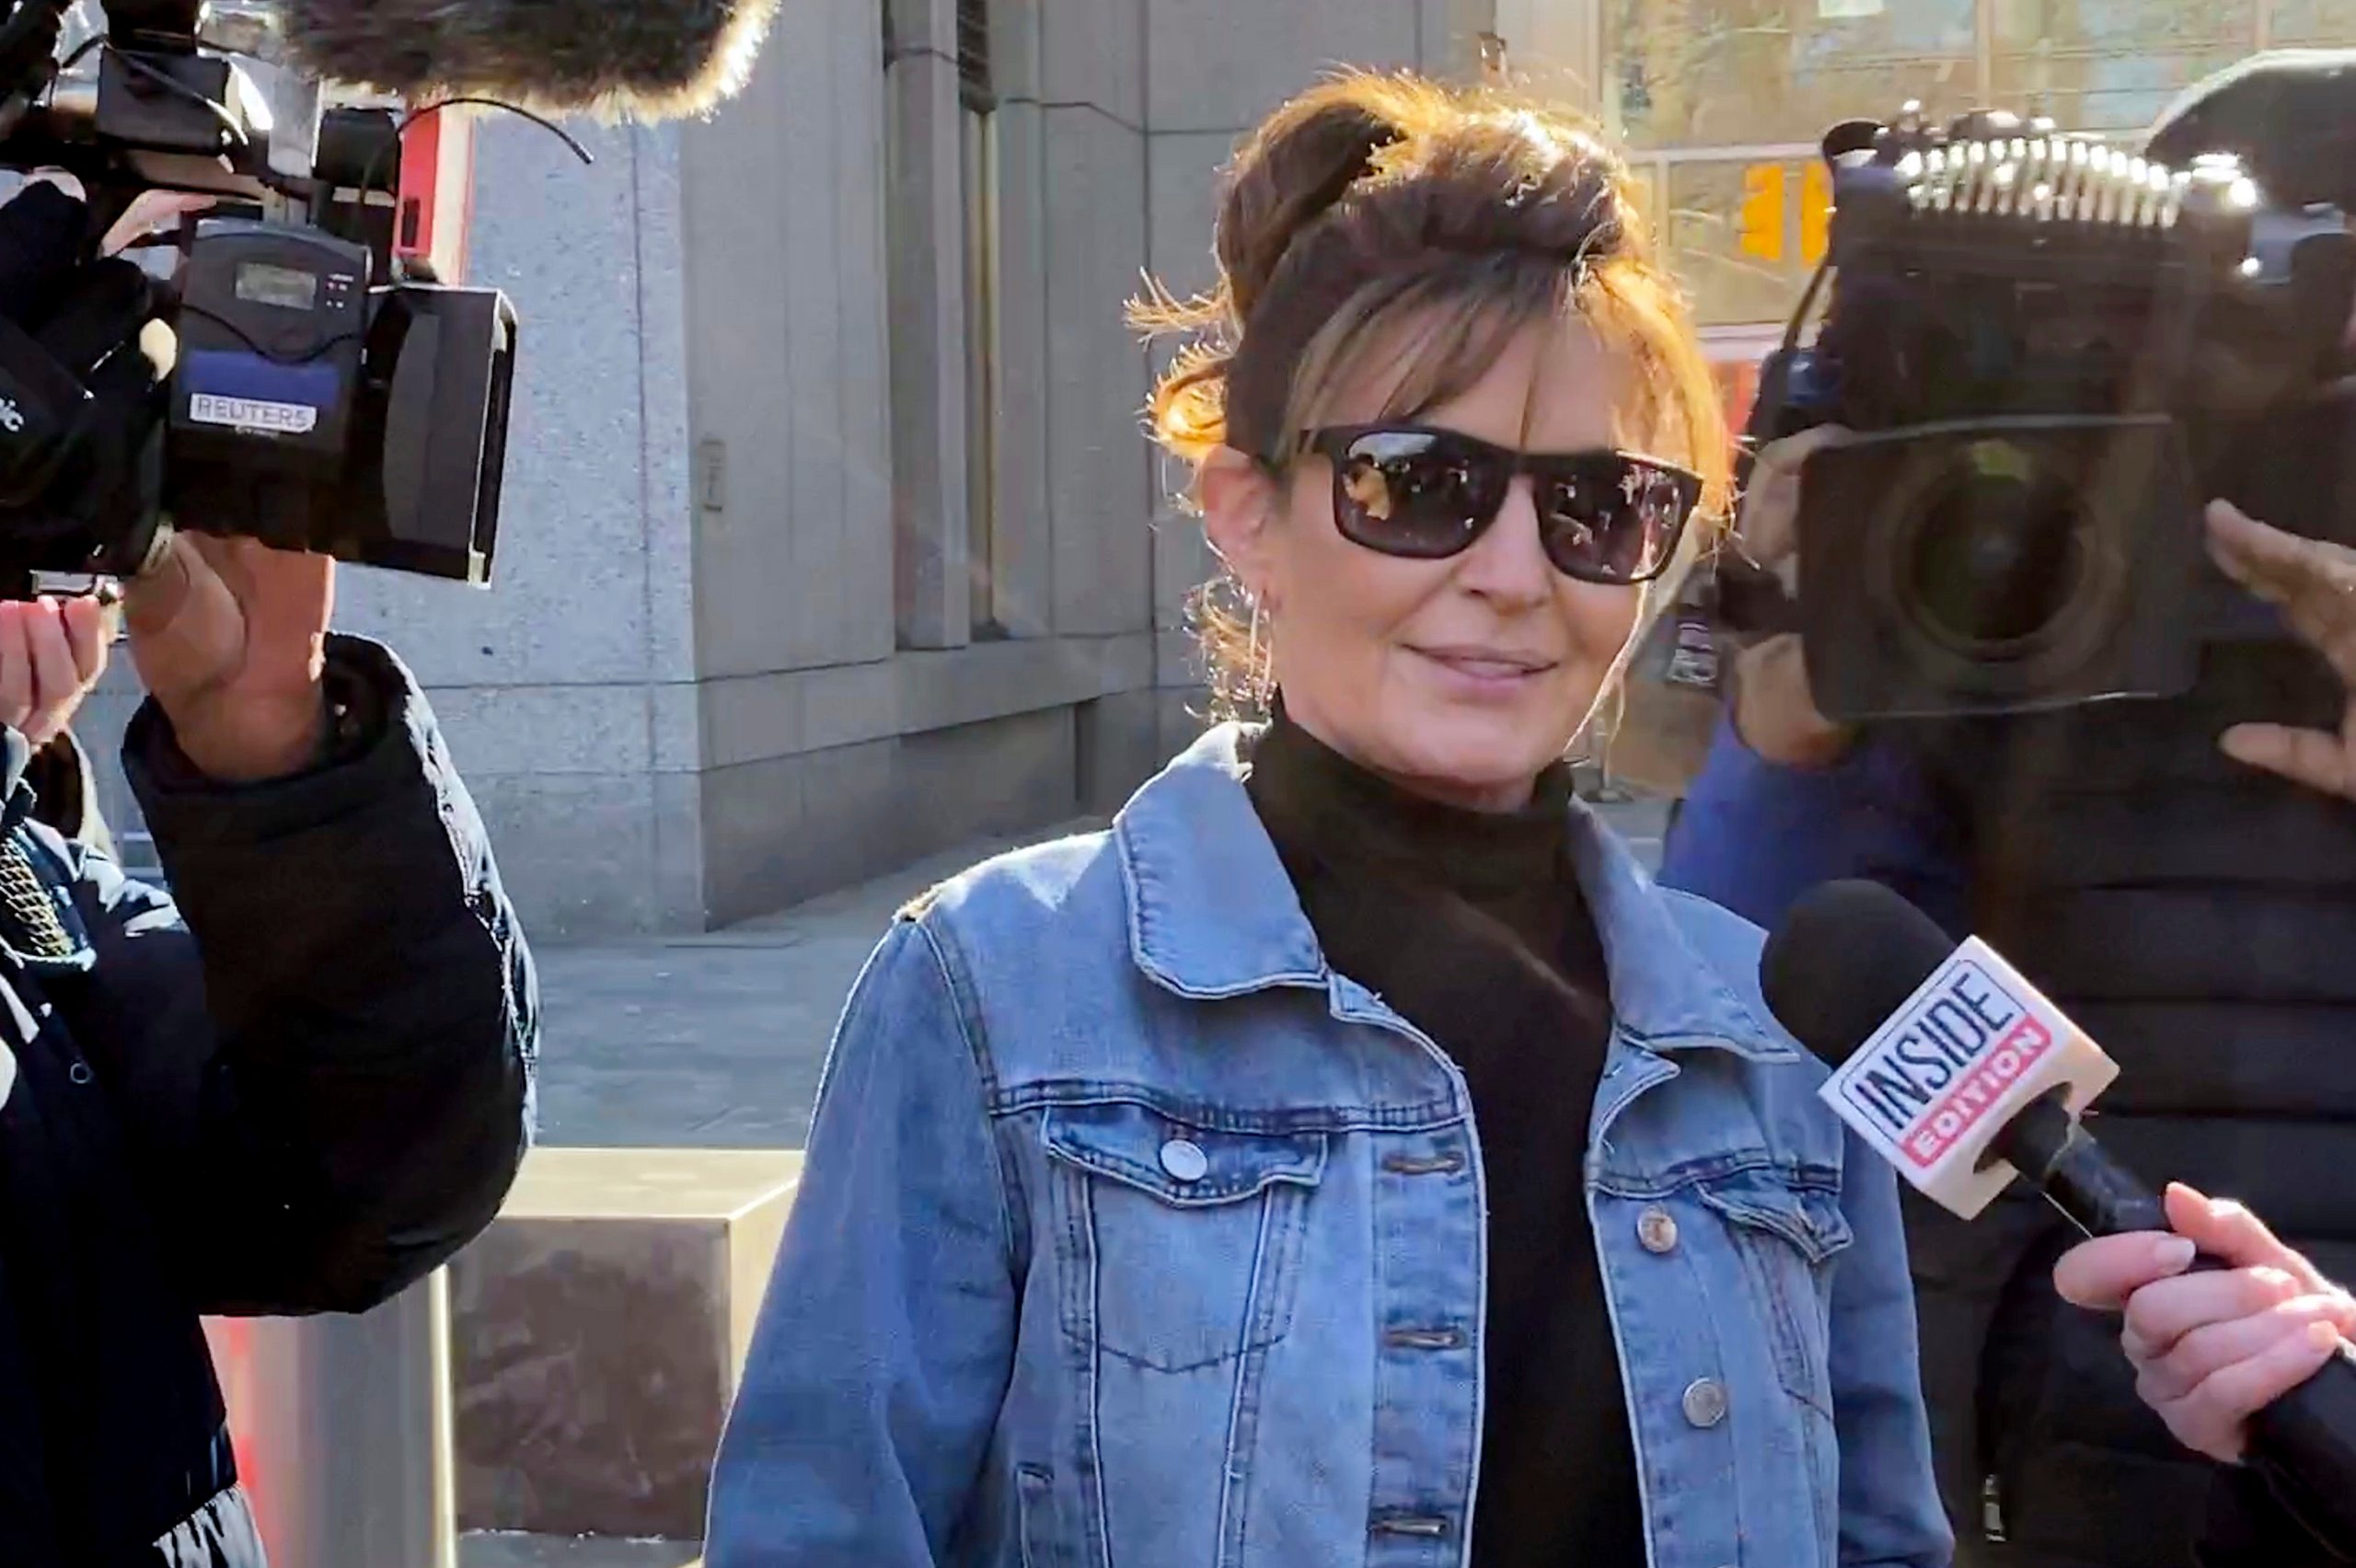 Jury rejects Sarah Palins lawsuit against New York Times